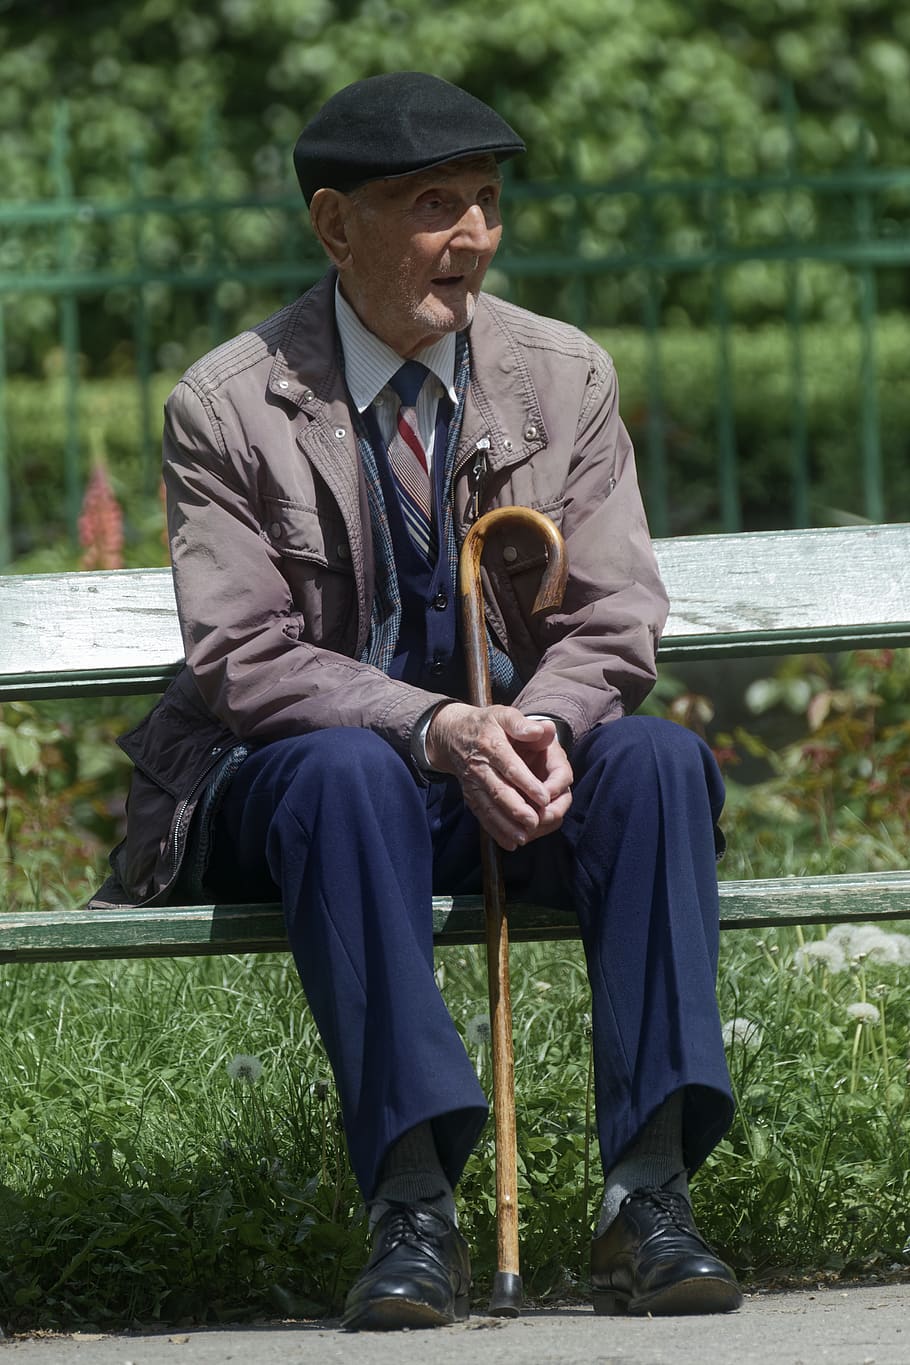 old, man, rod, cane, bank, resting, sad, lost, adult, the person